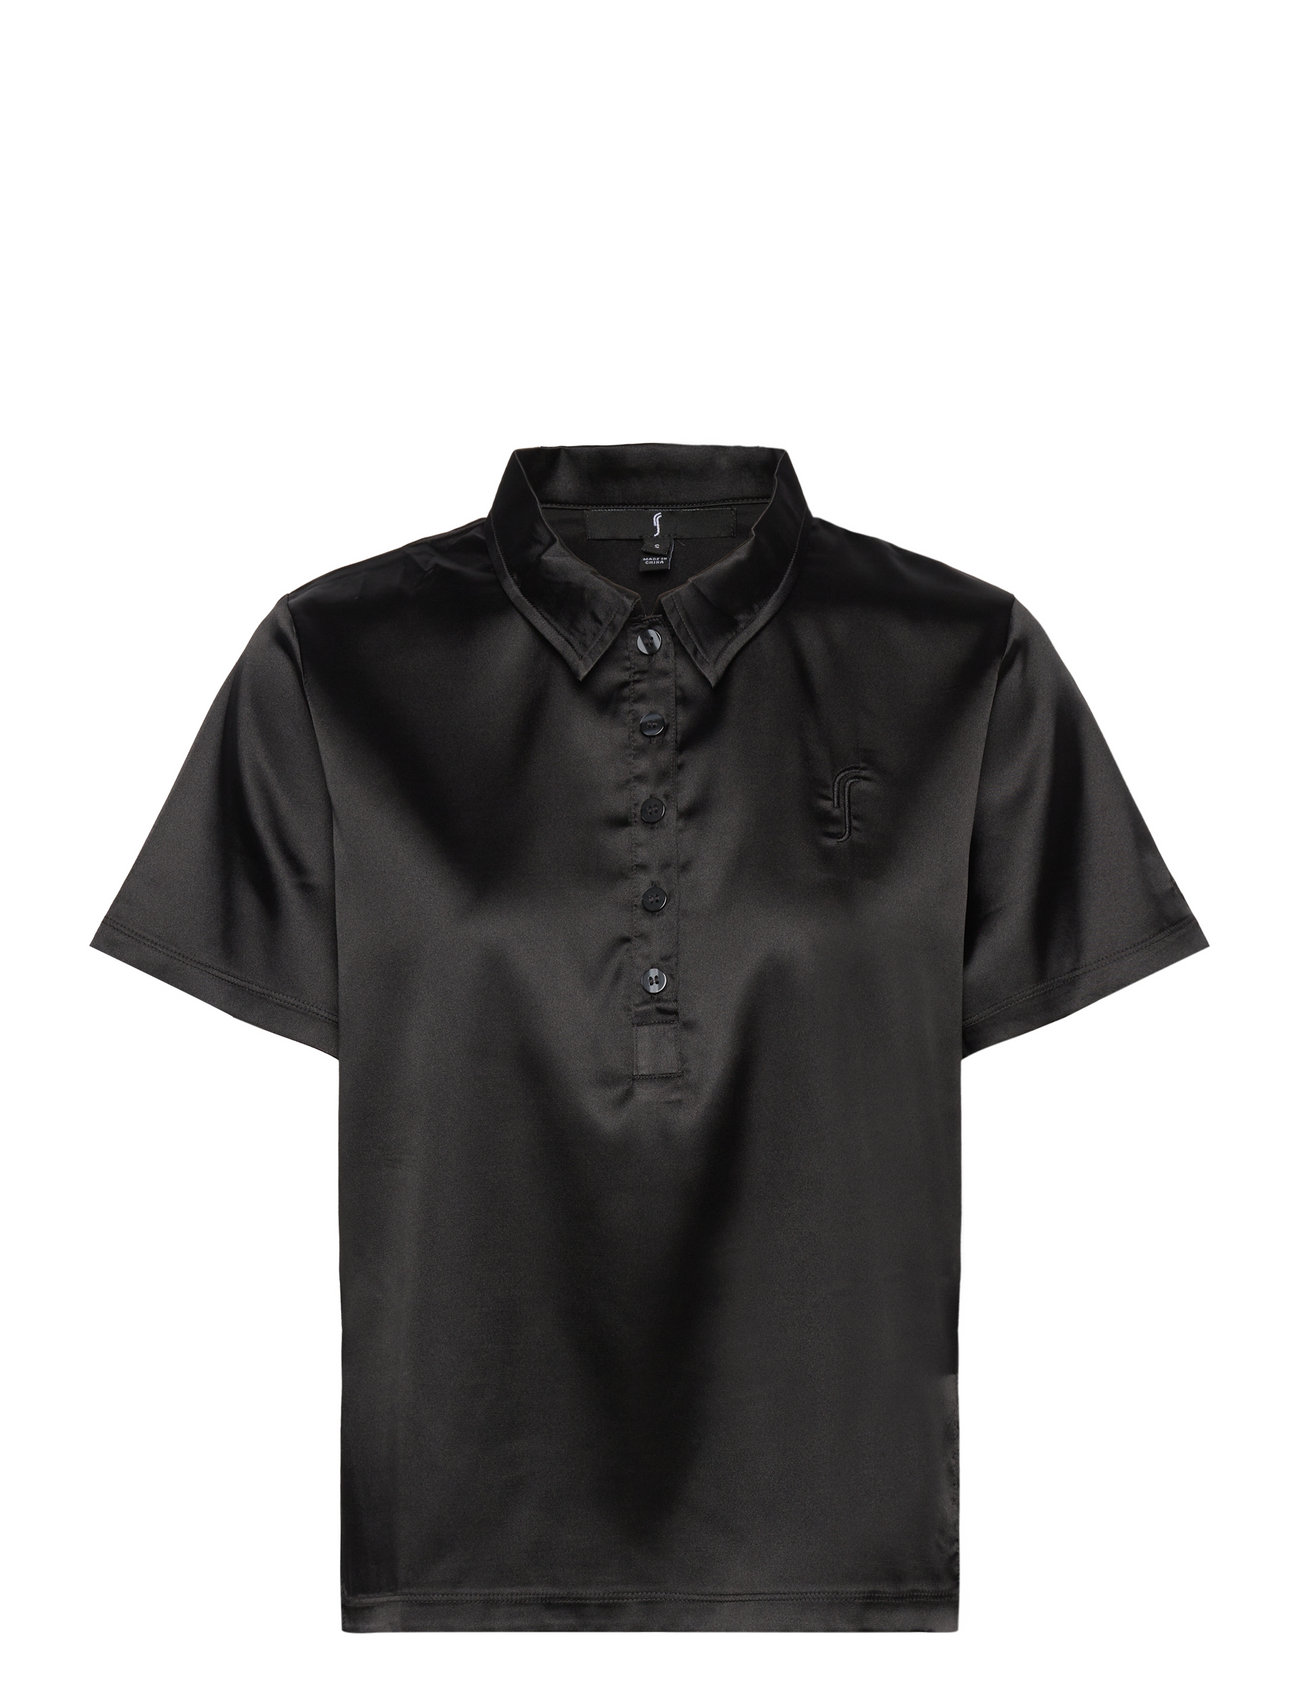 Kelly Polo Sport T-shirts & Tops Polos Black RS Sports